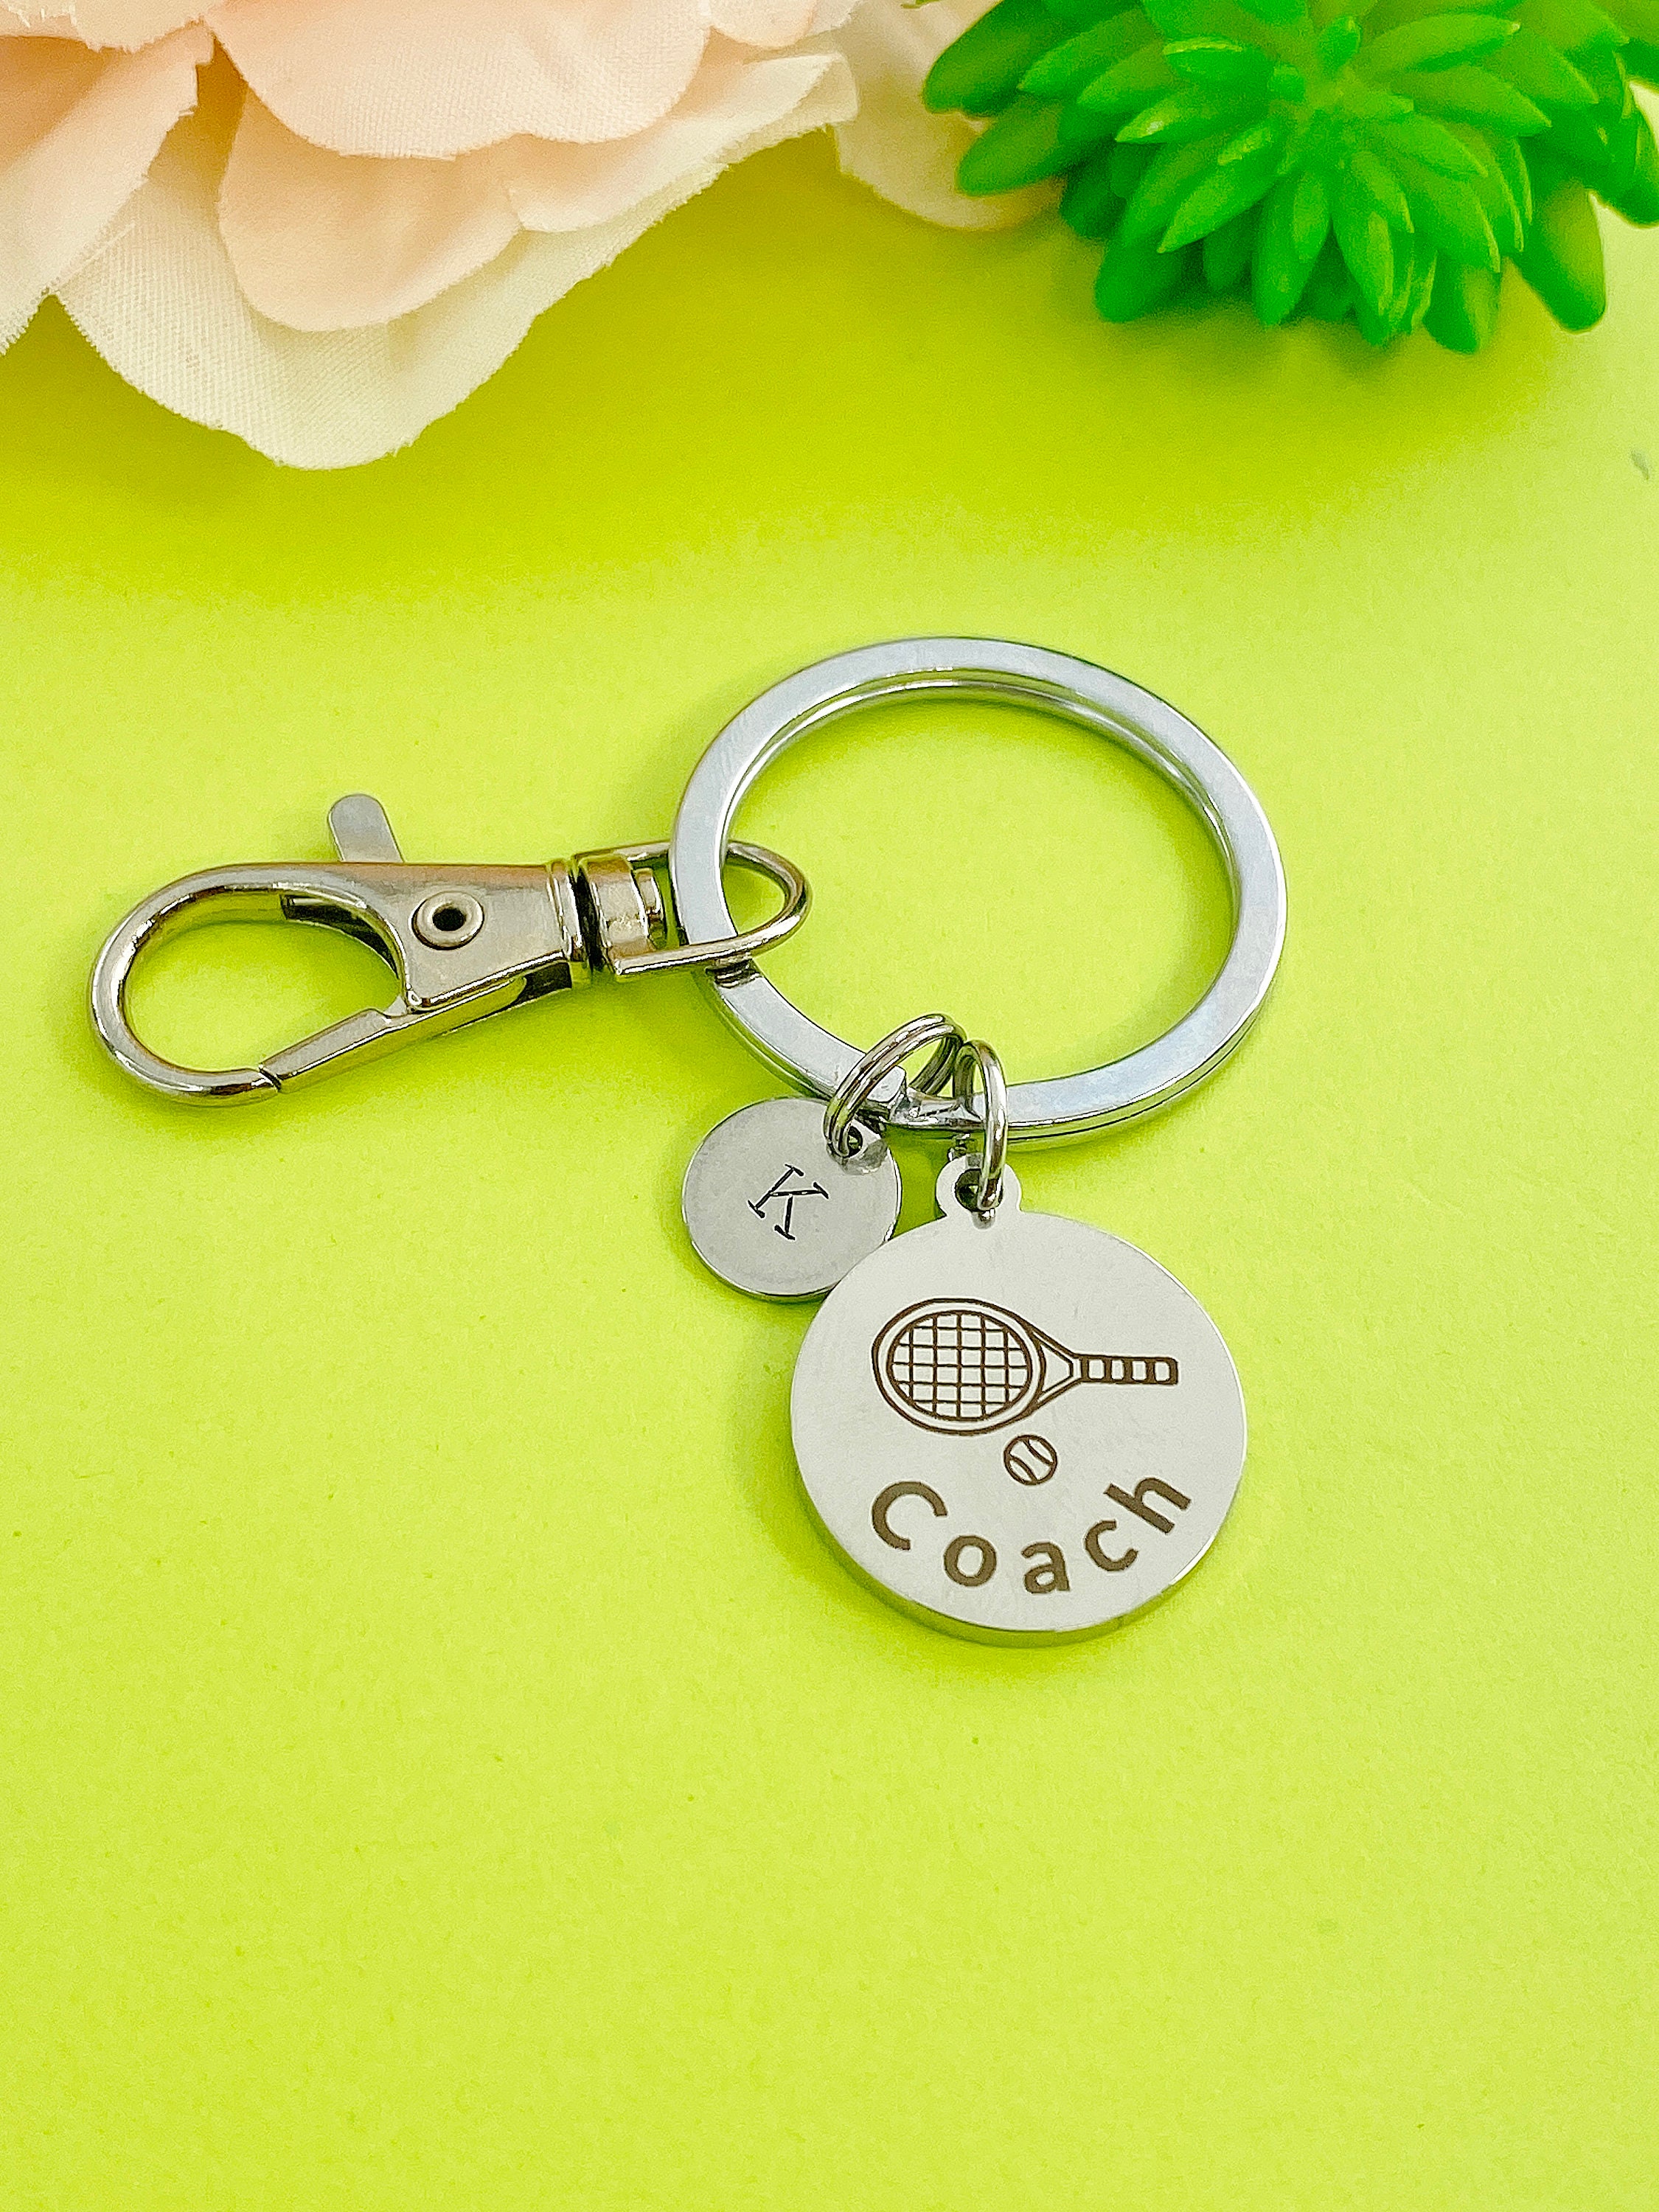 LeBuaJewelrytoo Tennis Coach Keychain - Lebua Jewelry, Stainless Steel, Christmas Gifts for Tennis Coach, D128